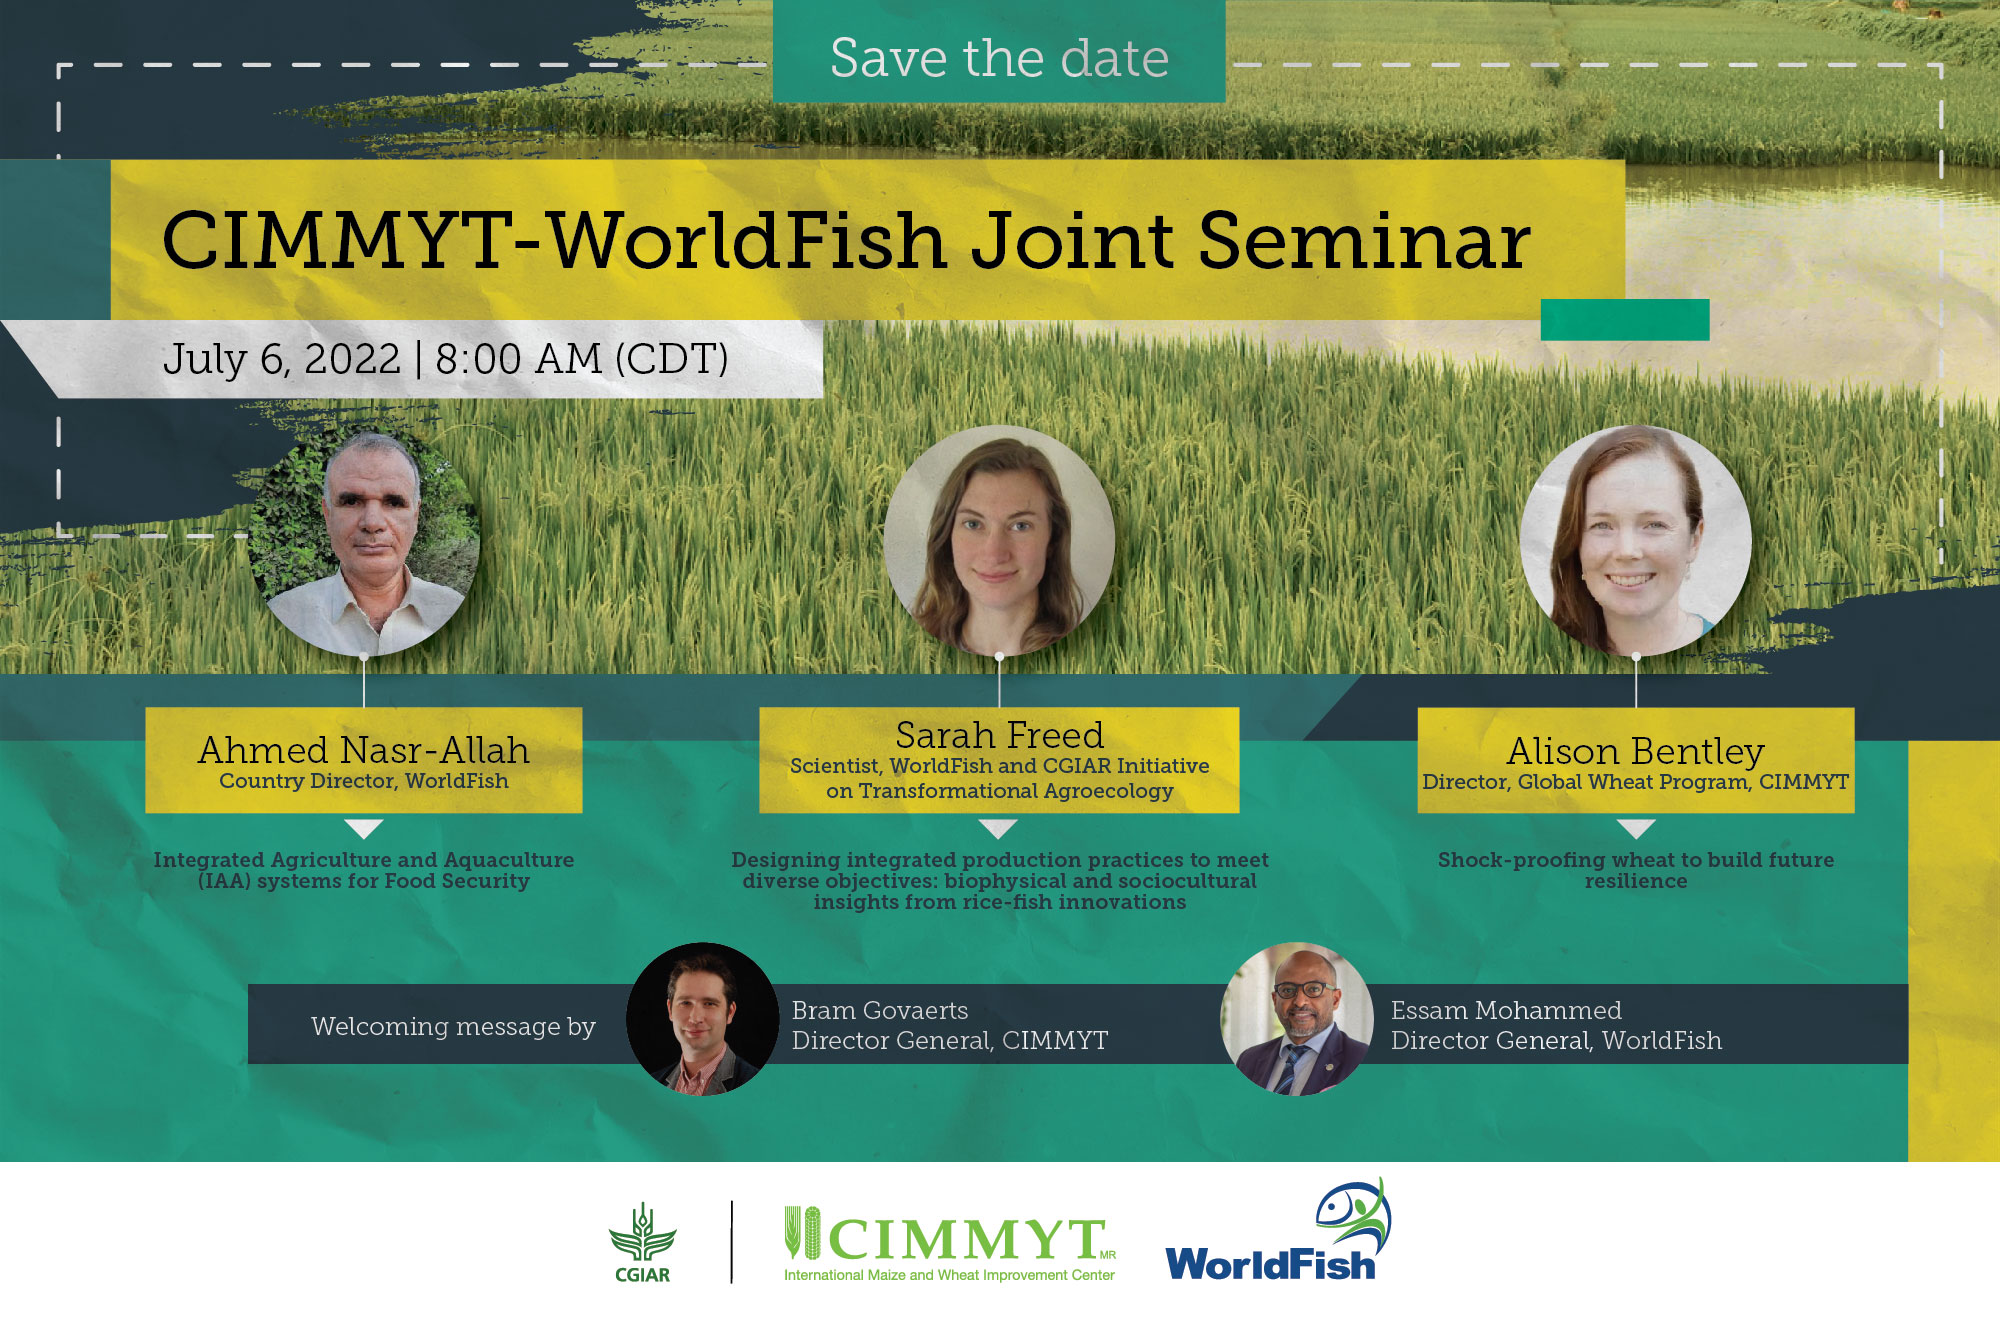 Cross-center learning between CIMMYT and WorldFish